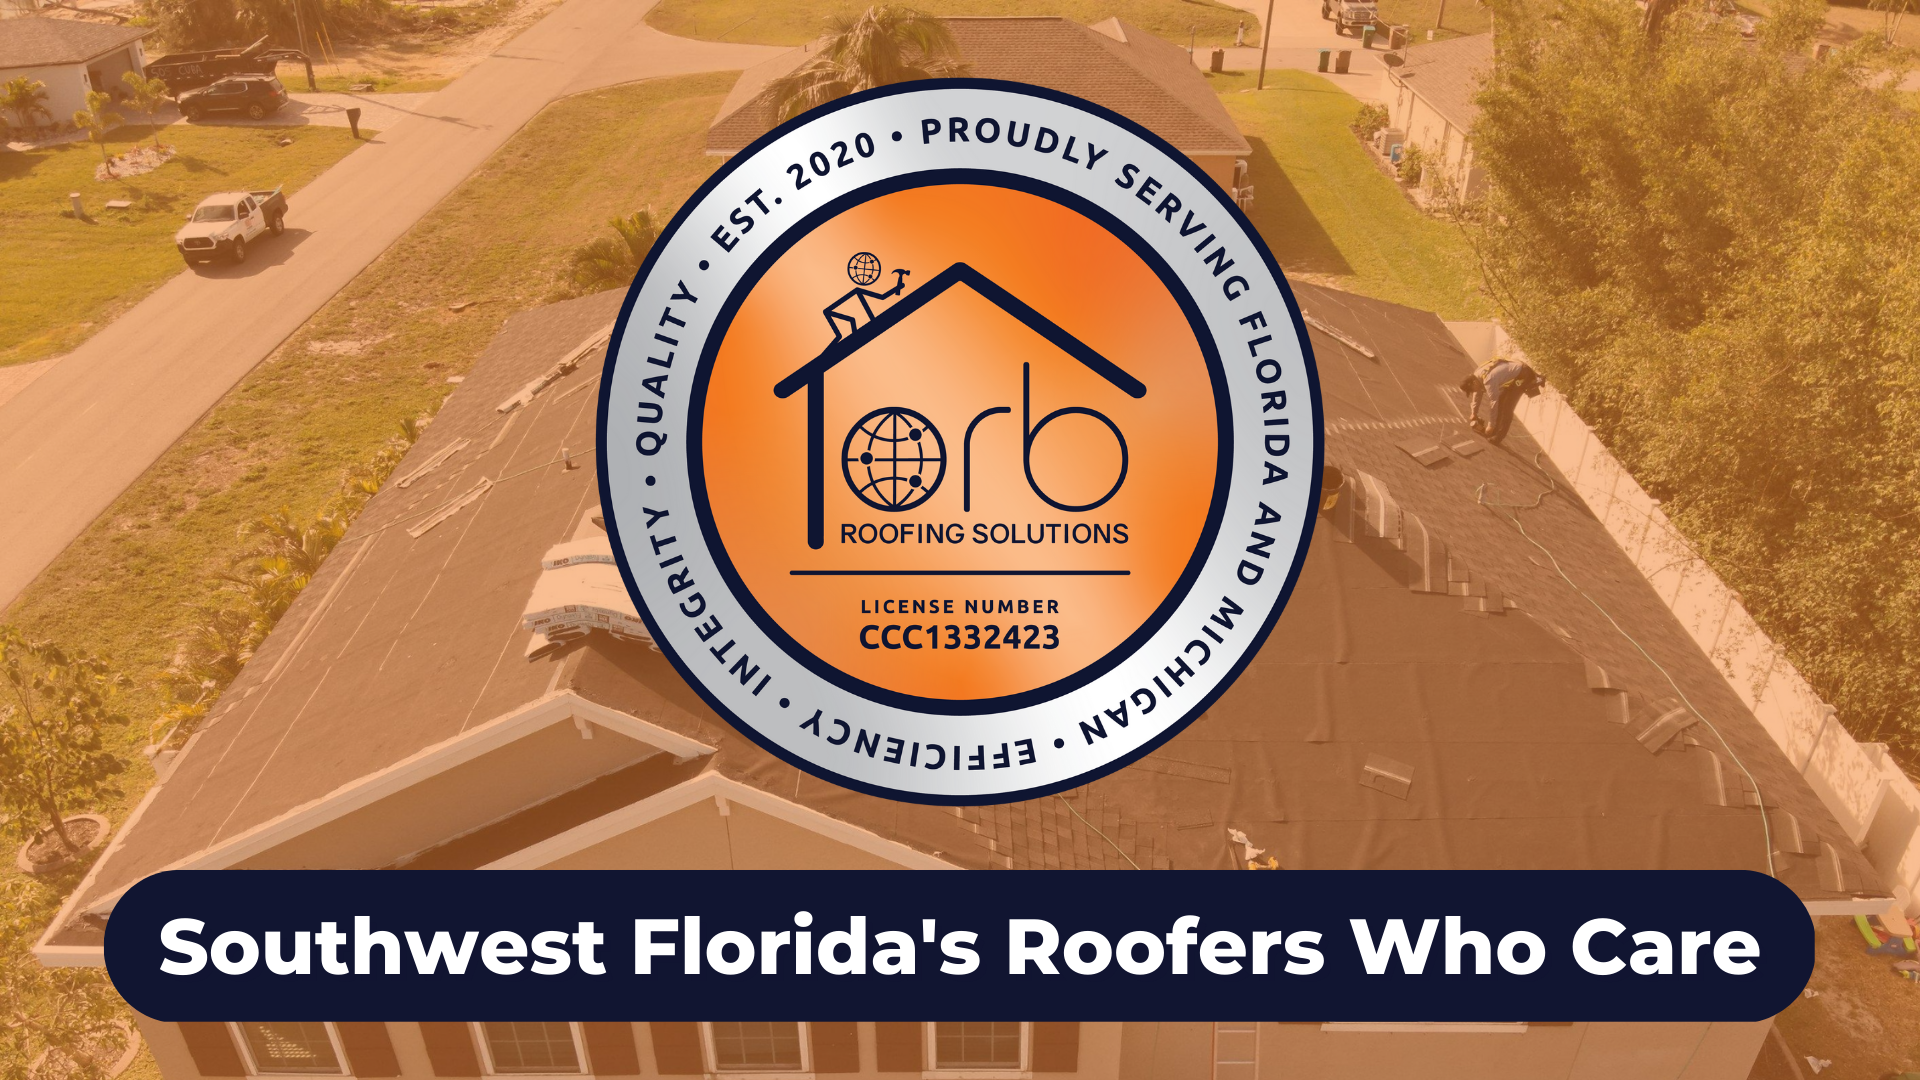 ORB Roofing Solutions Introduces New Service Offering to Naples Residents